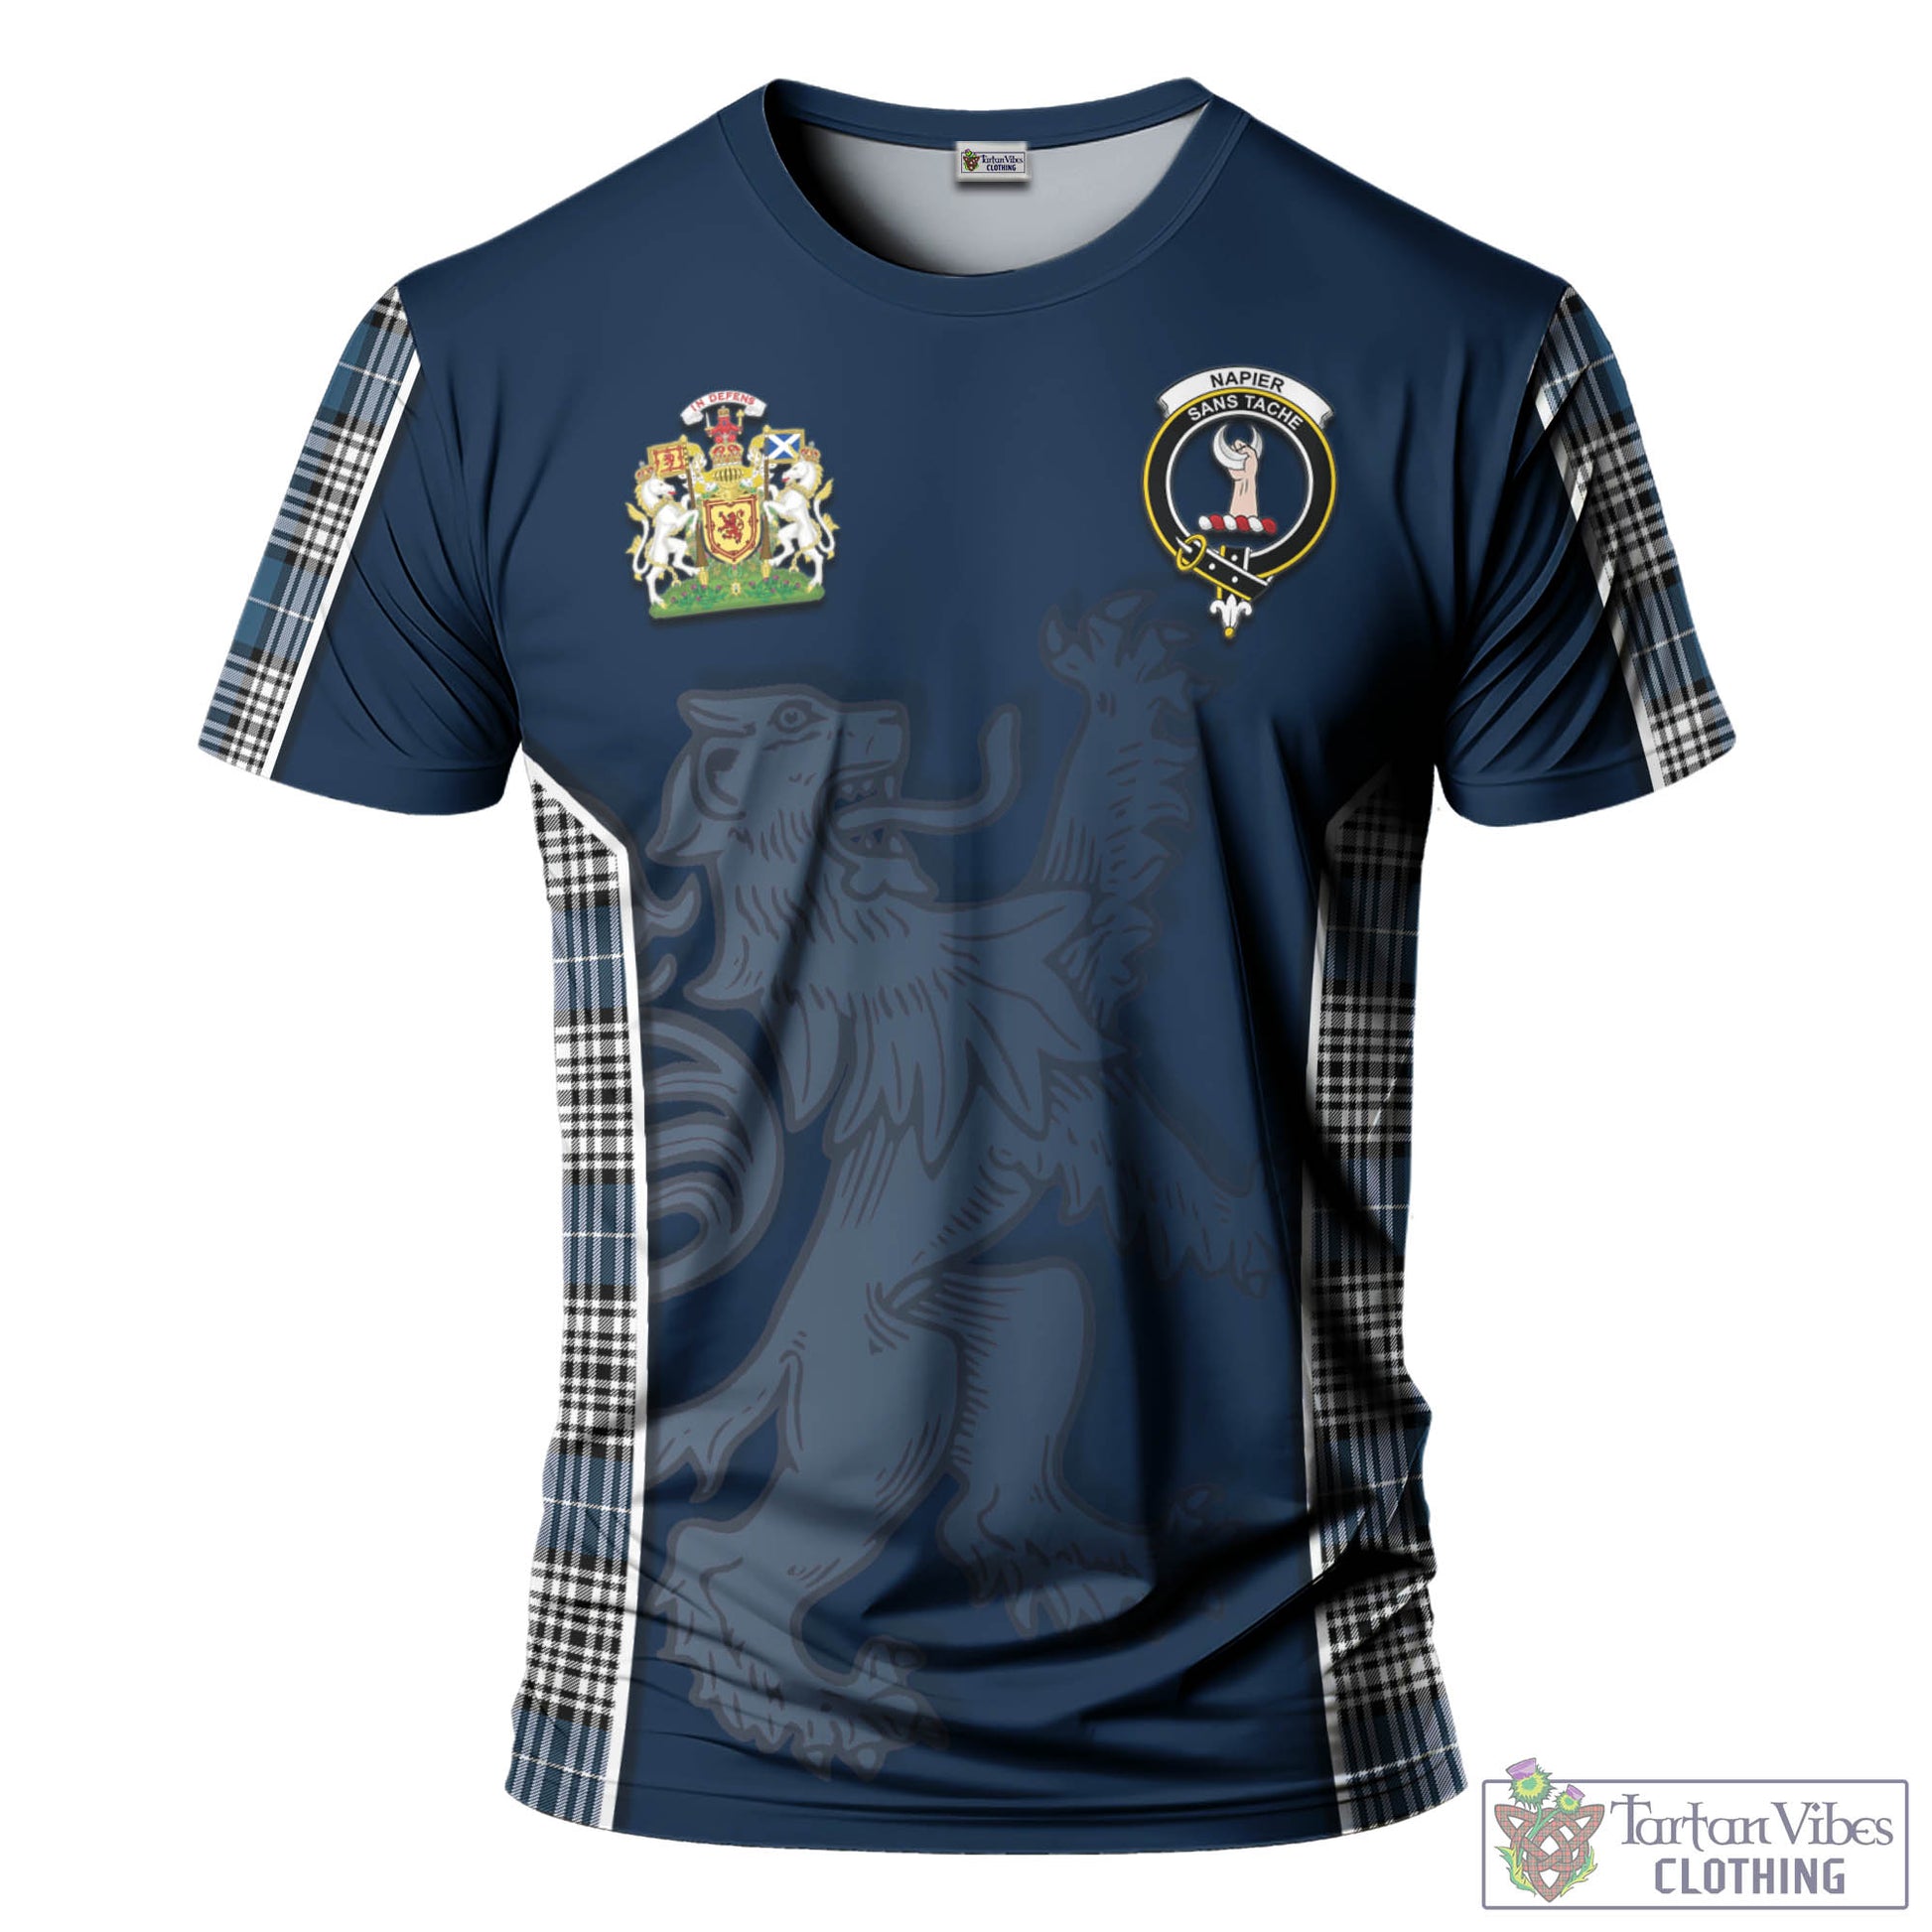 Tartan Vibes Clothing Napier Modern Tartan T-Shirt with Family Crest and Lion Rampant Vibes Sport Style